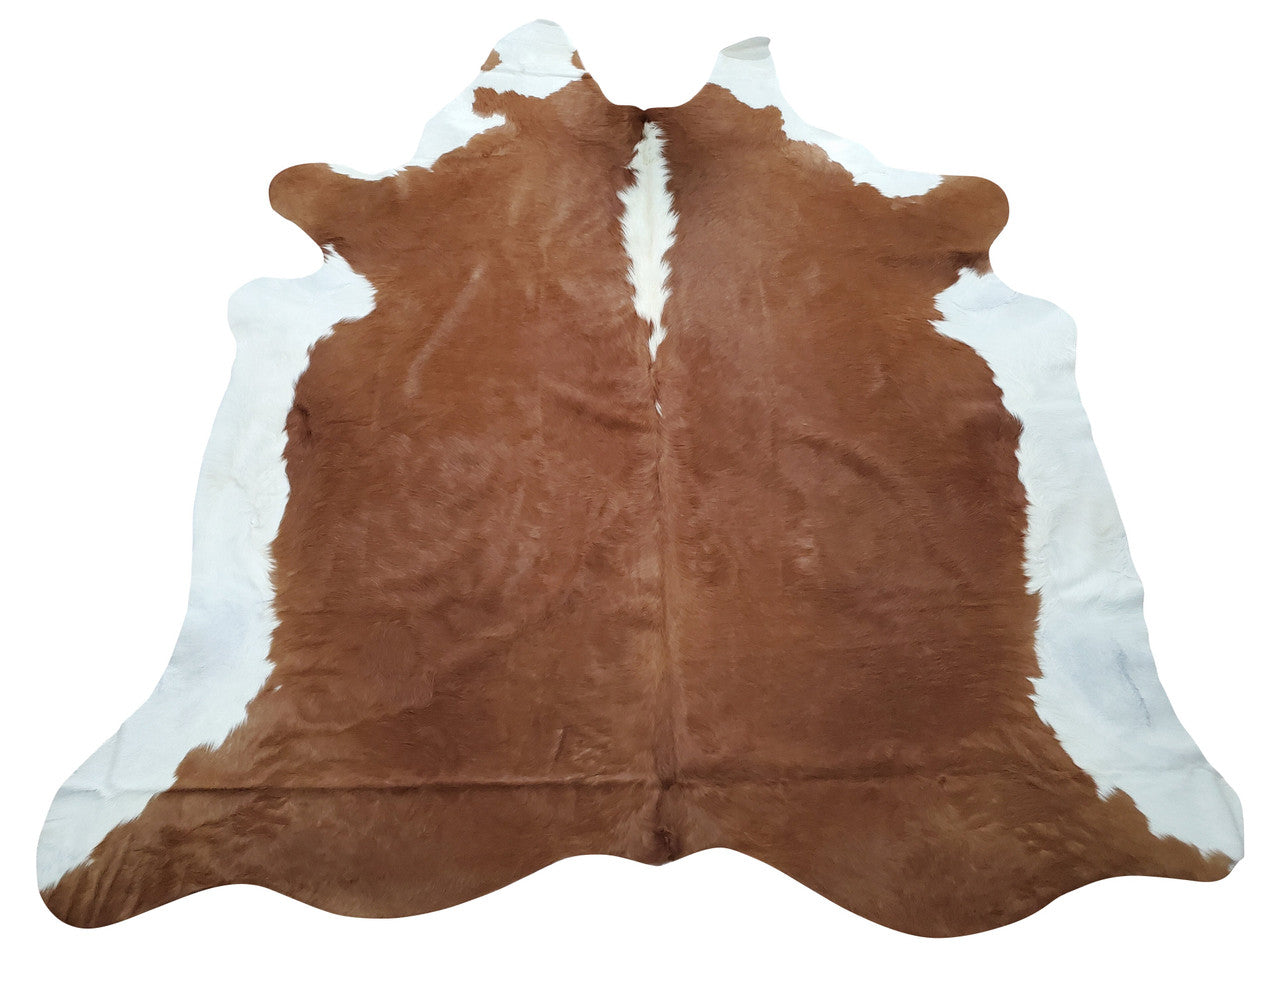 This Hereford cowhide rug is the perfect mix of cozy and rustic touches. It adds warmth to any room while also bringing an element of nature indoors.
